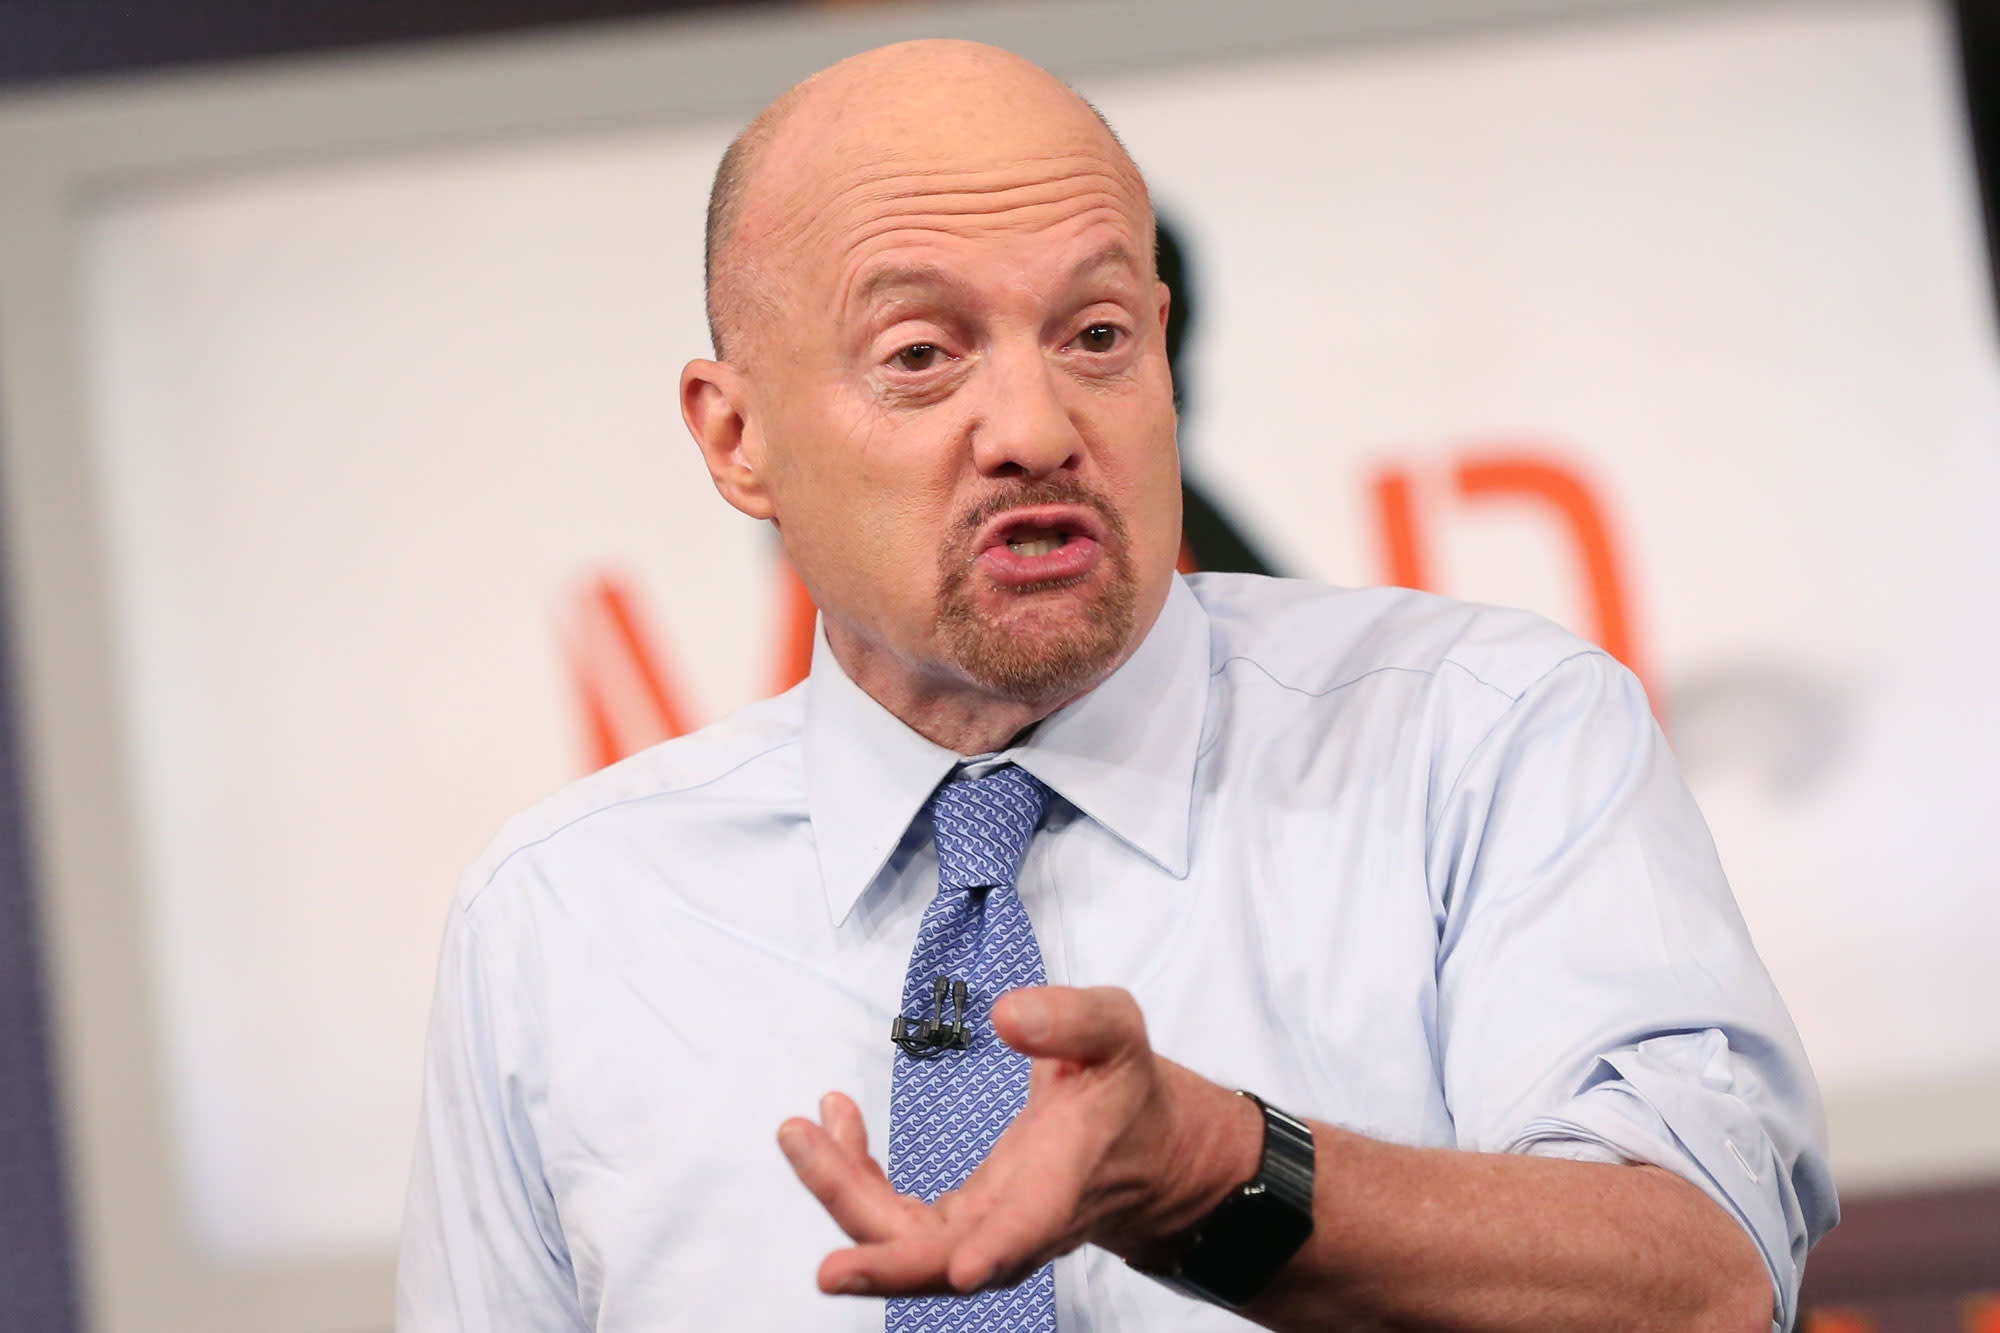 Jim Cramer says the Santa Claus rally may have started early this year